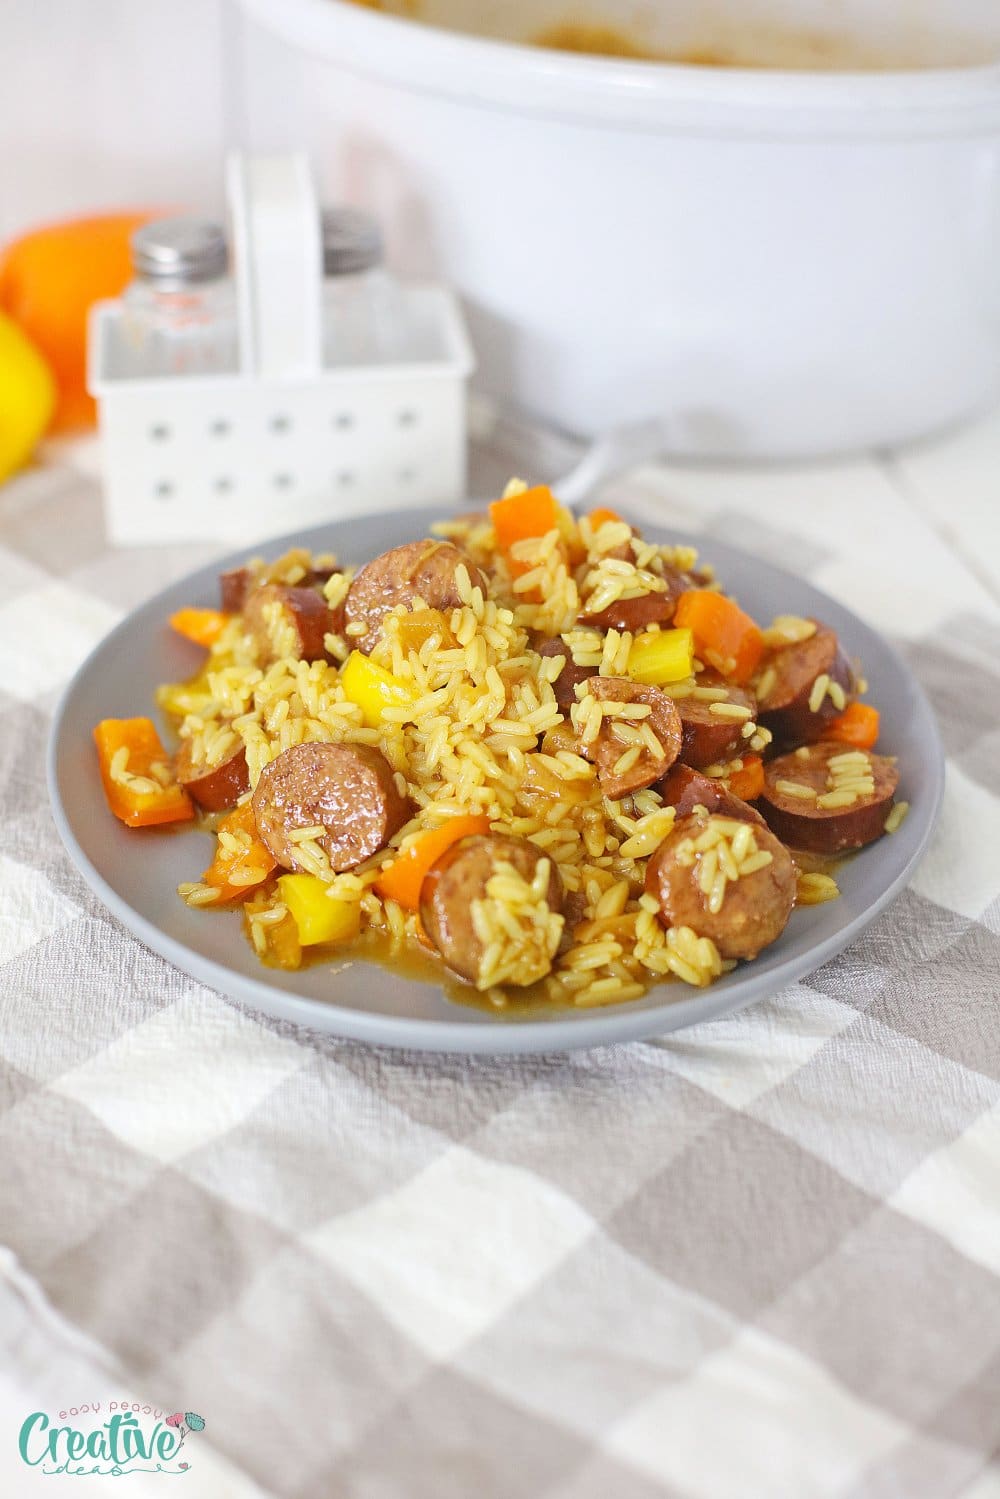 Kielbasa slow cooker on a plate to serve at the kitchen table